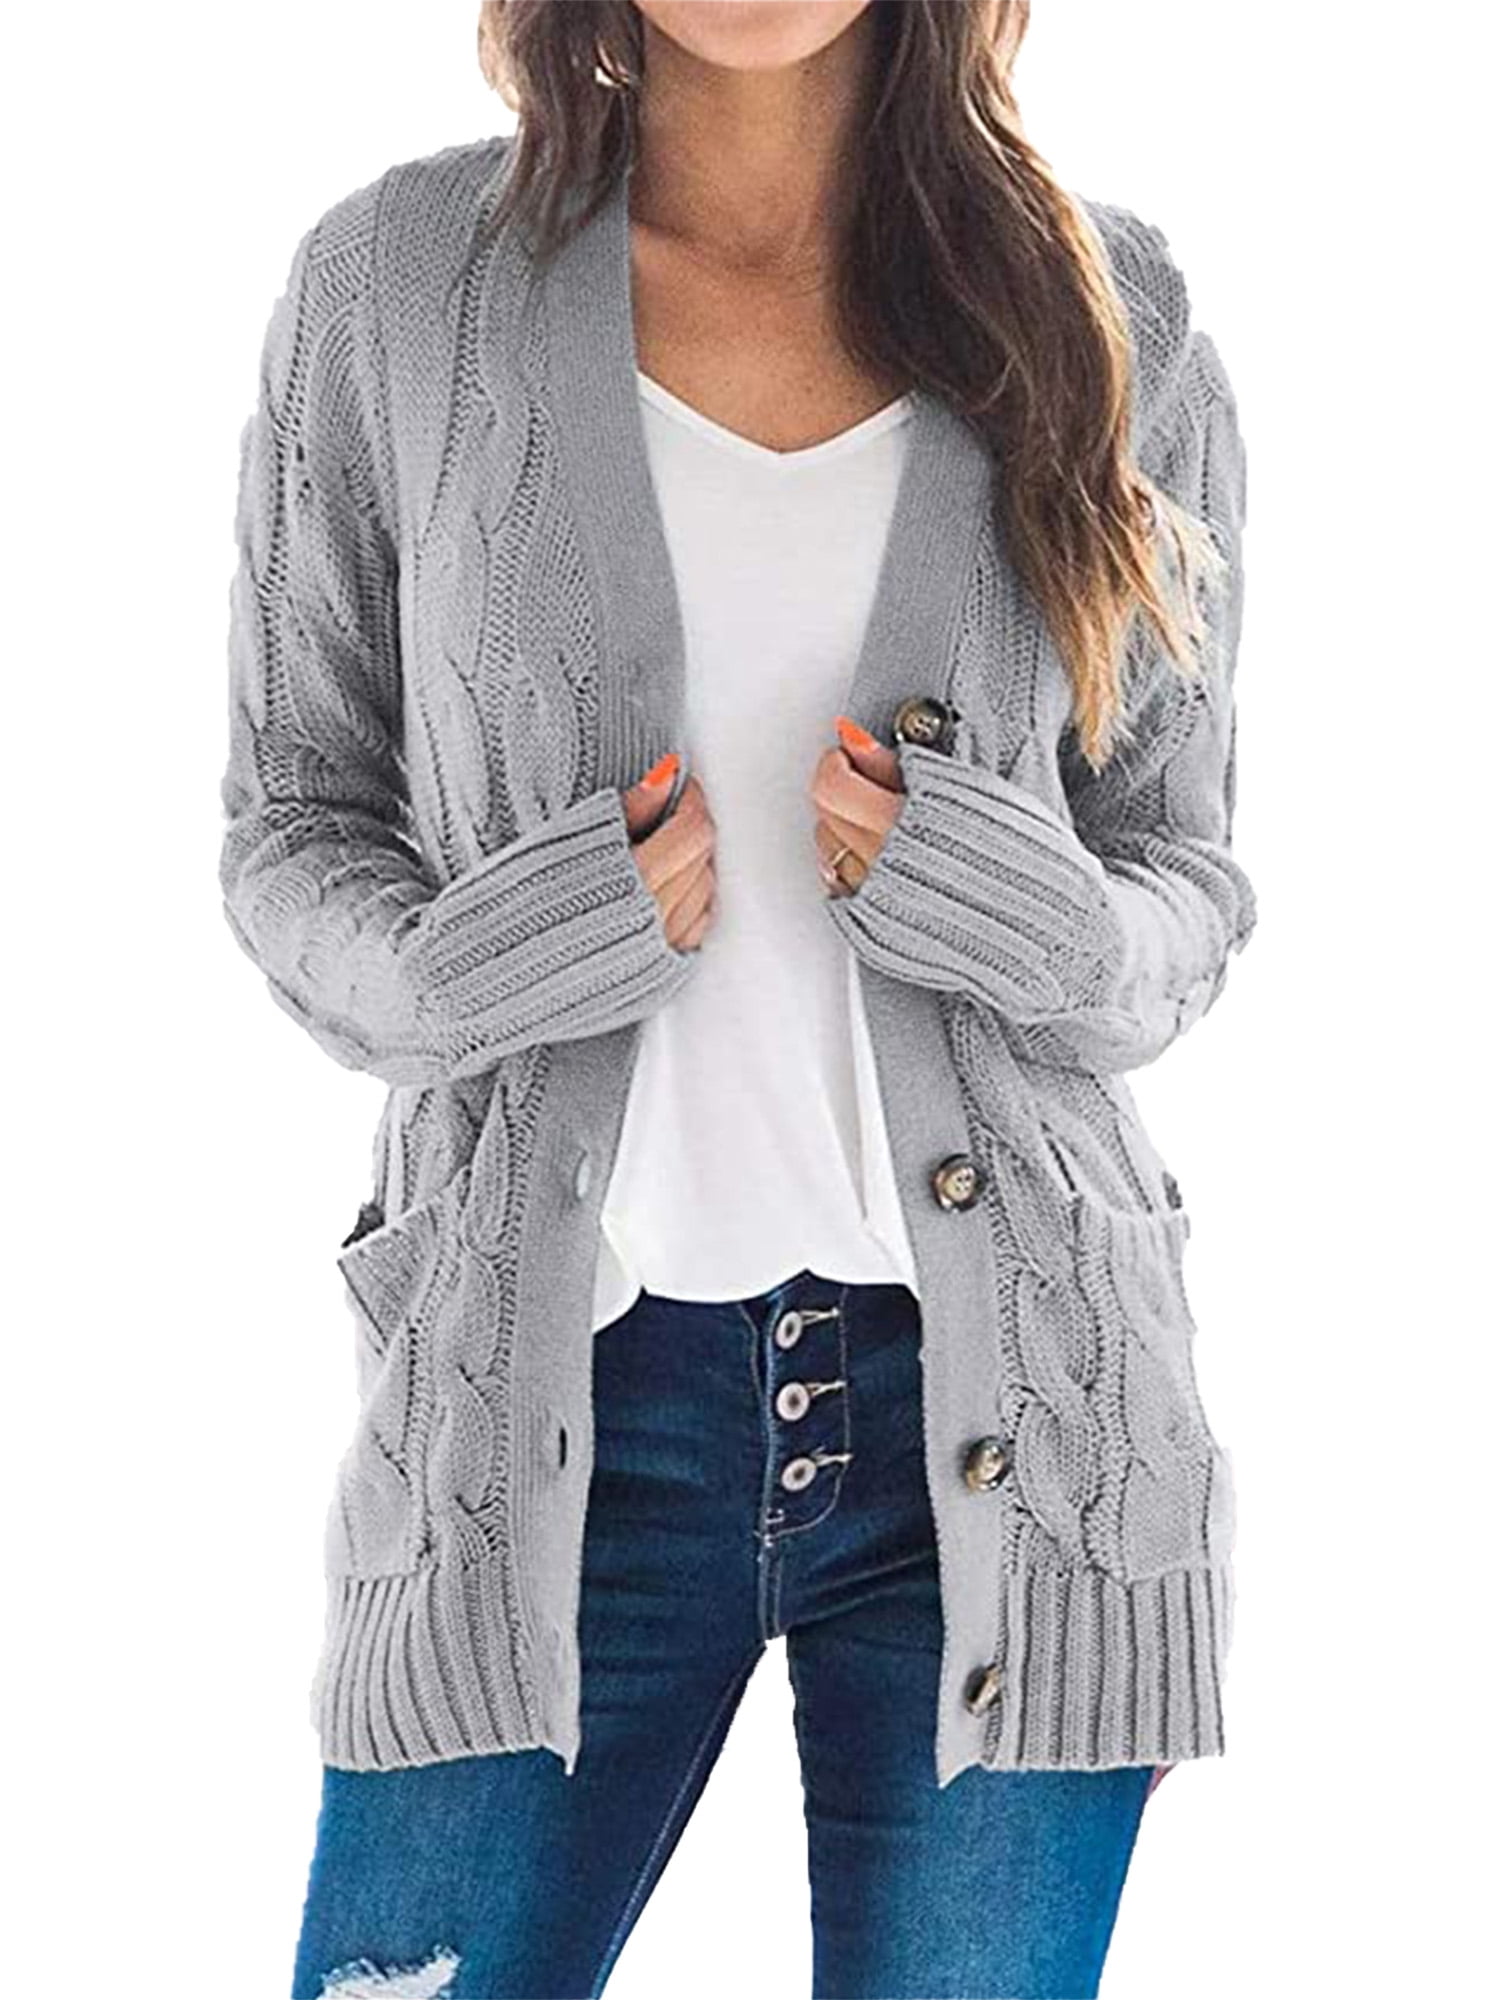 Cordon Jeans Company Long Sweater light grey cable stitch casual look Fashion Sweaters Long Sweaters 